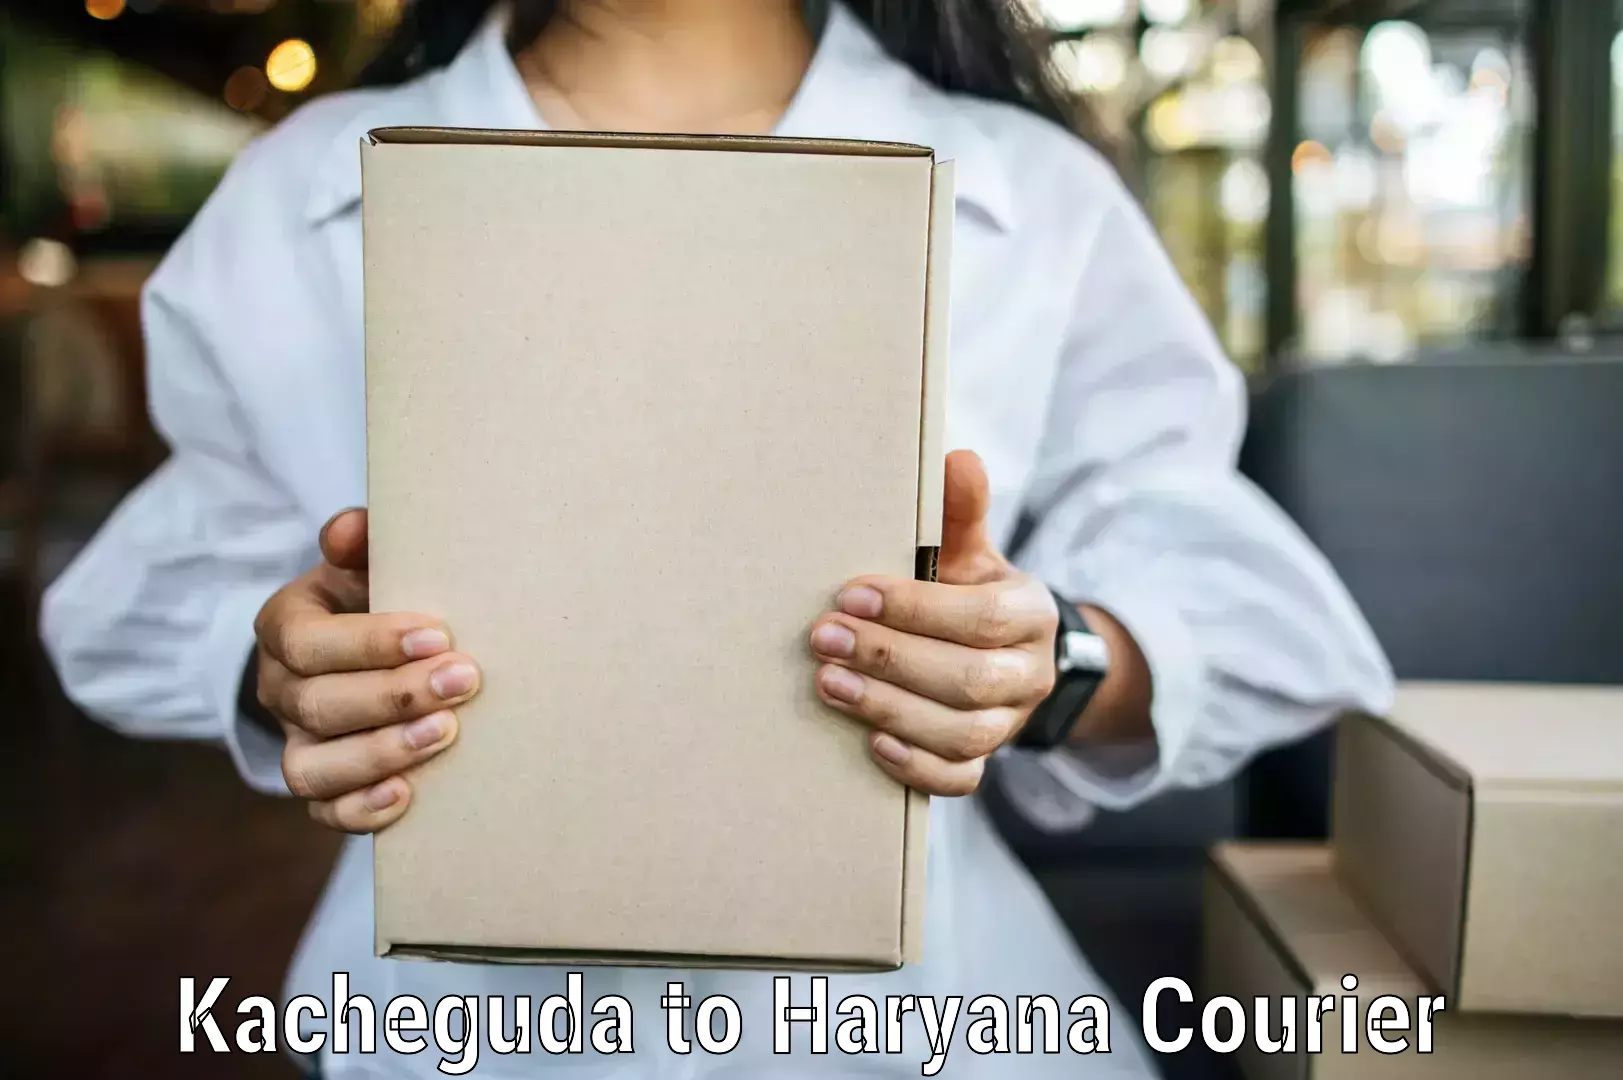 Multi-national courier services Kacheguda to Gurgaon